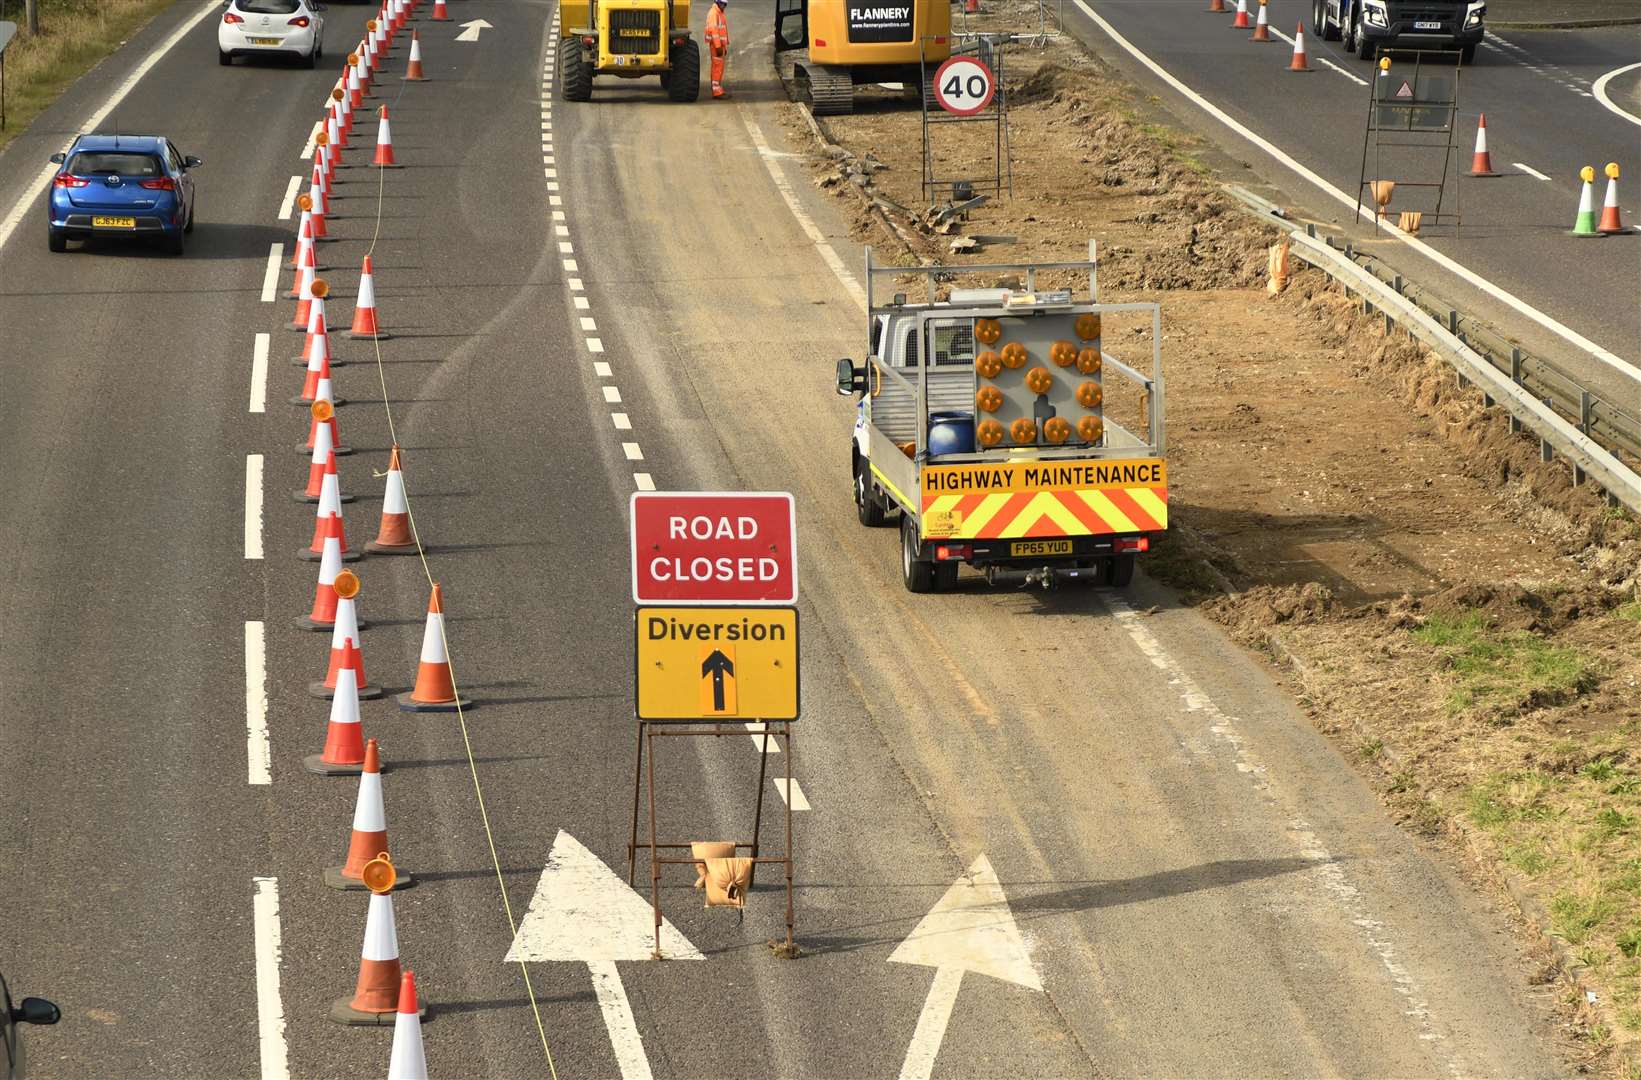 Drivers should know where there are roadworks